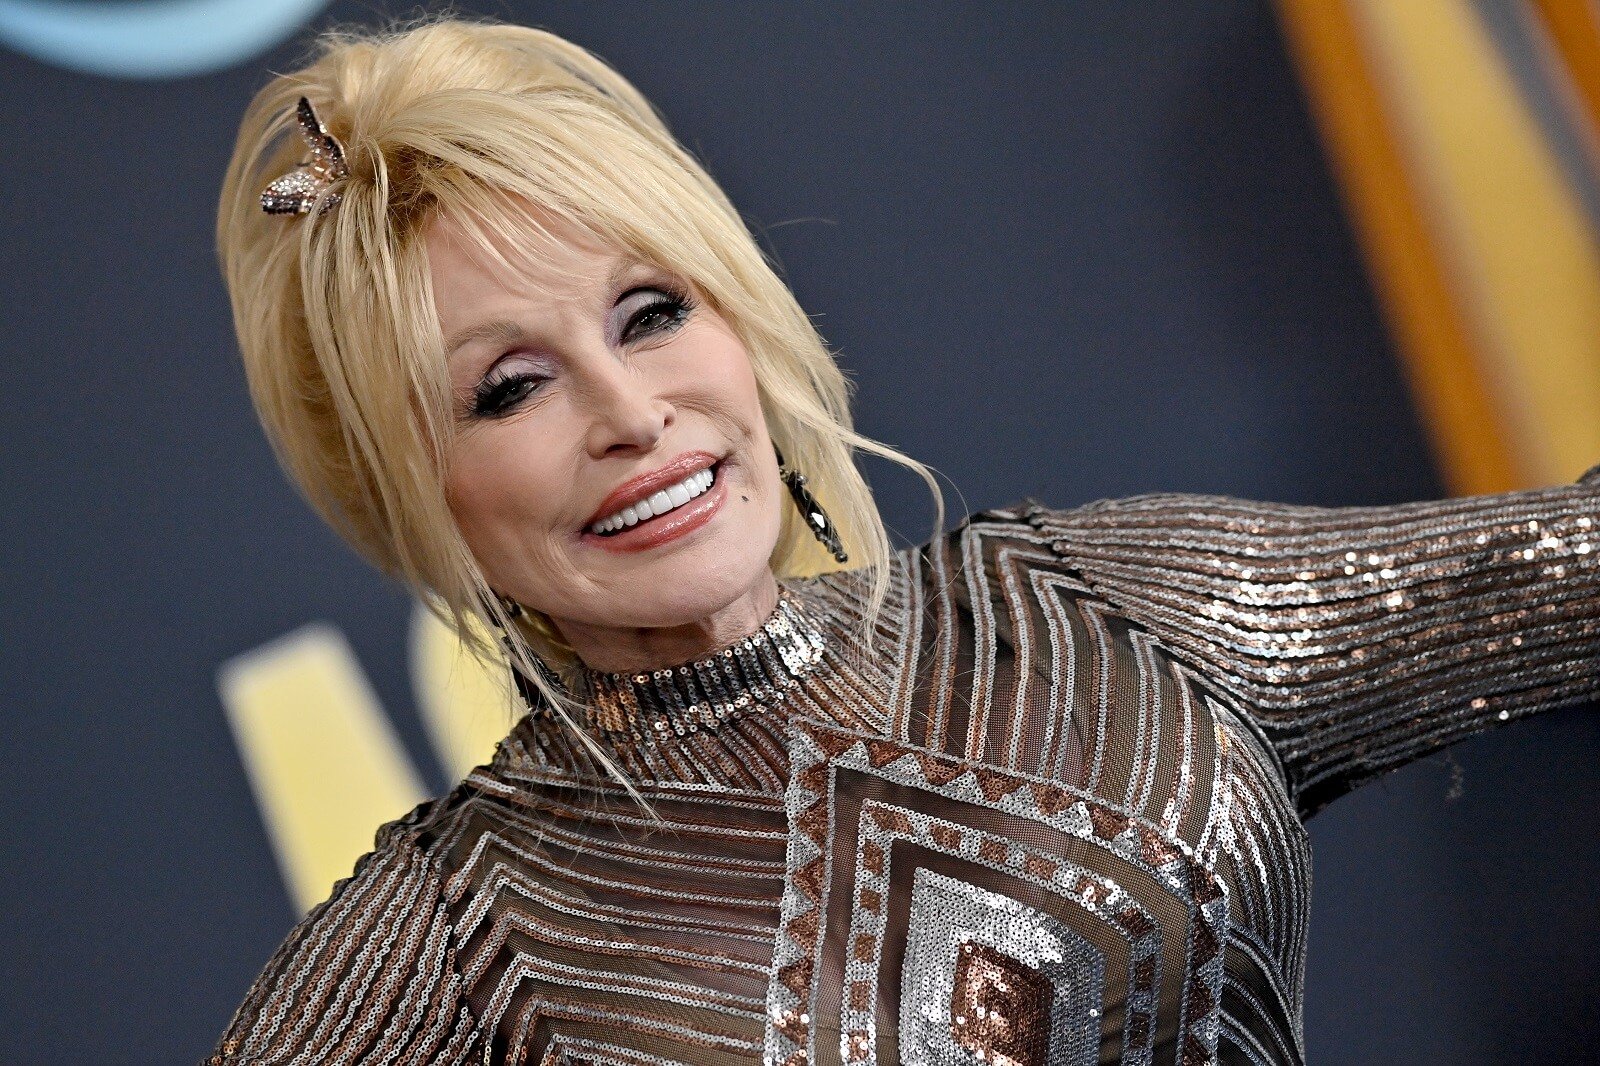 Dolly Parton smiles in a gold and silver shimmery dress